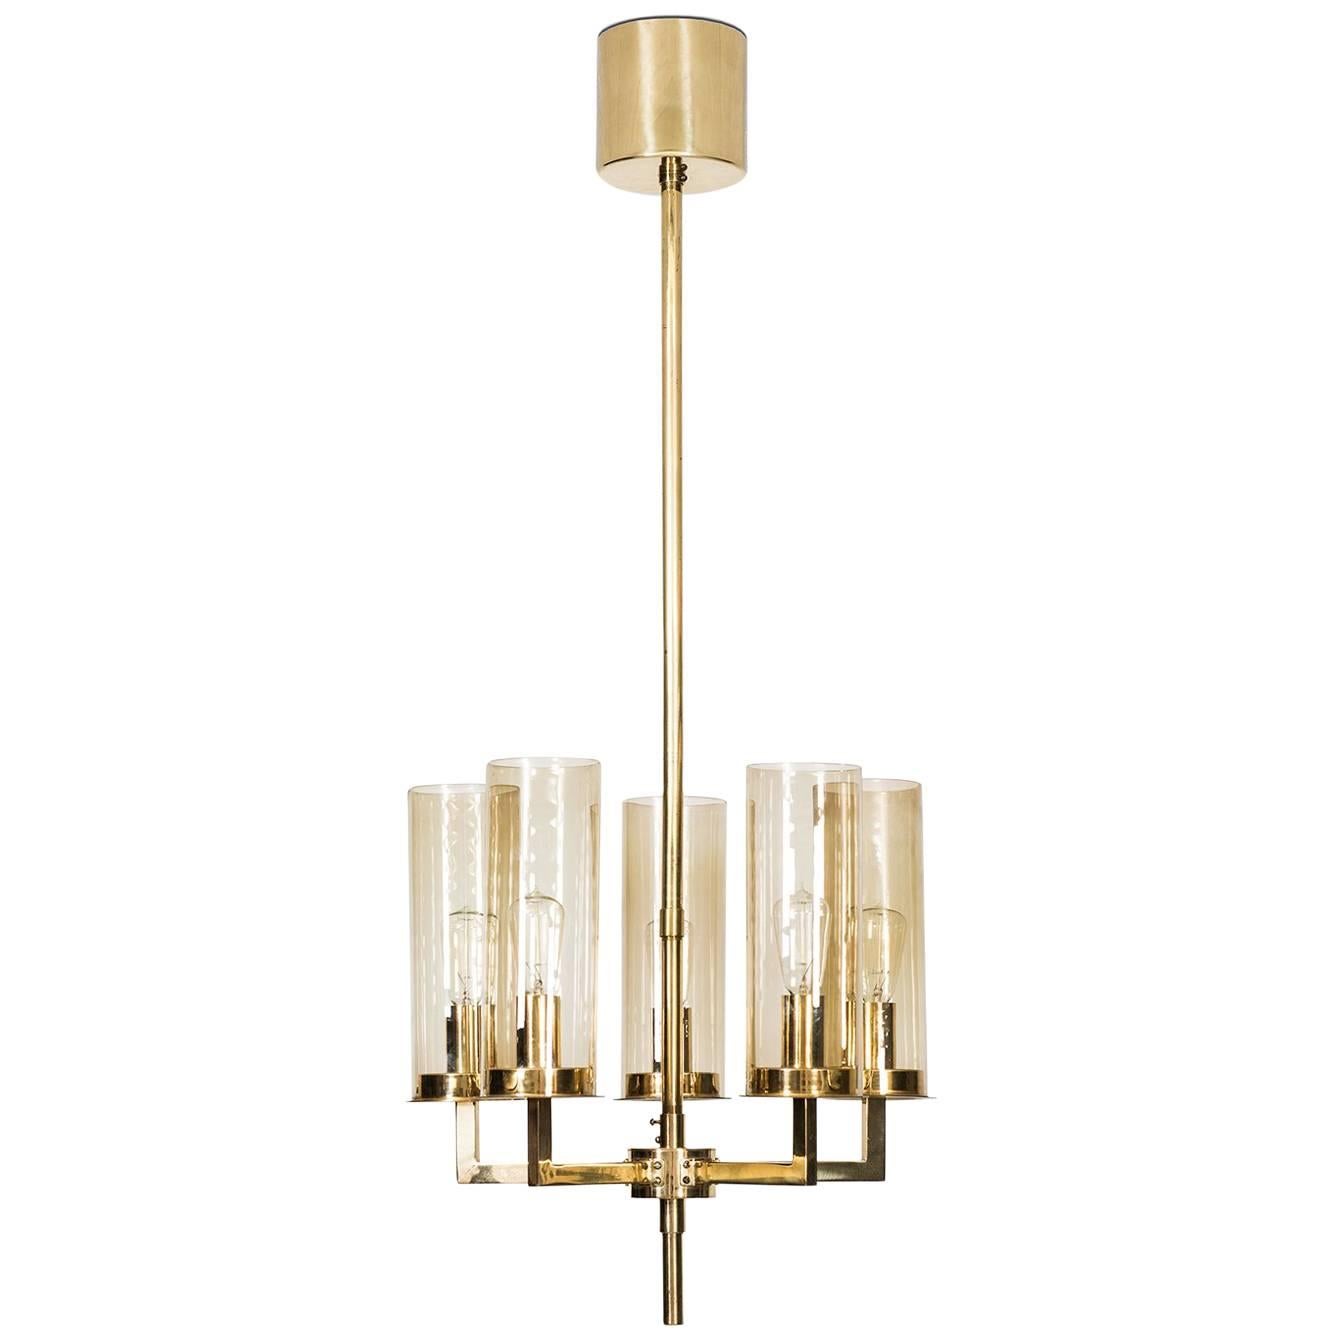 Hans-Agne Jakobsson Ceiling Lamp in Brass and Glass